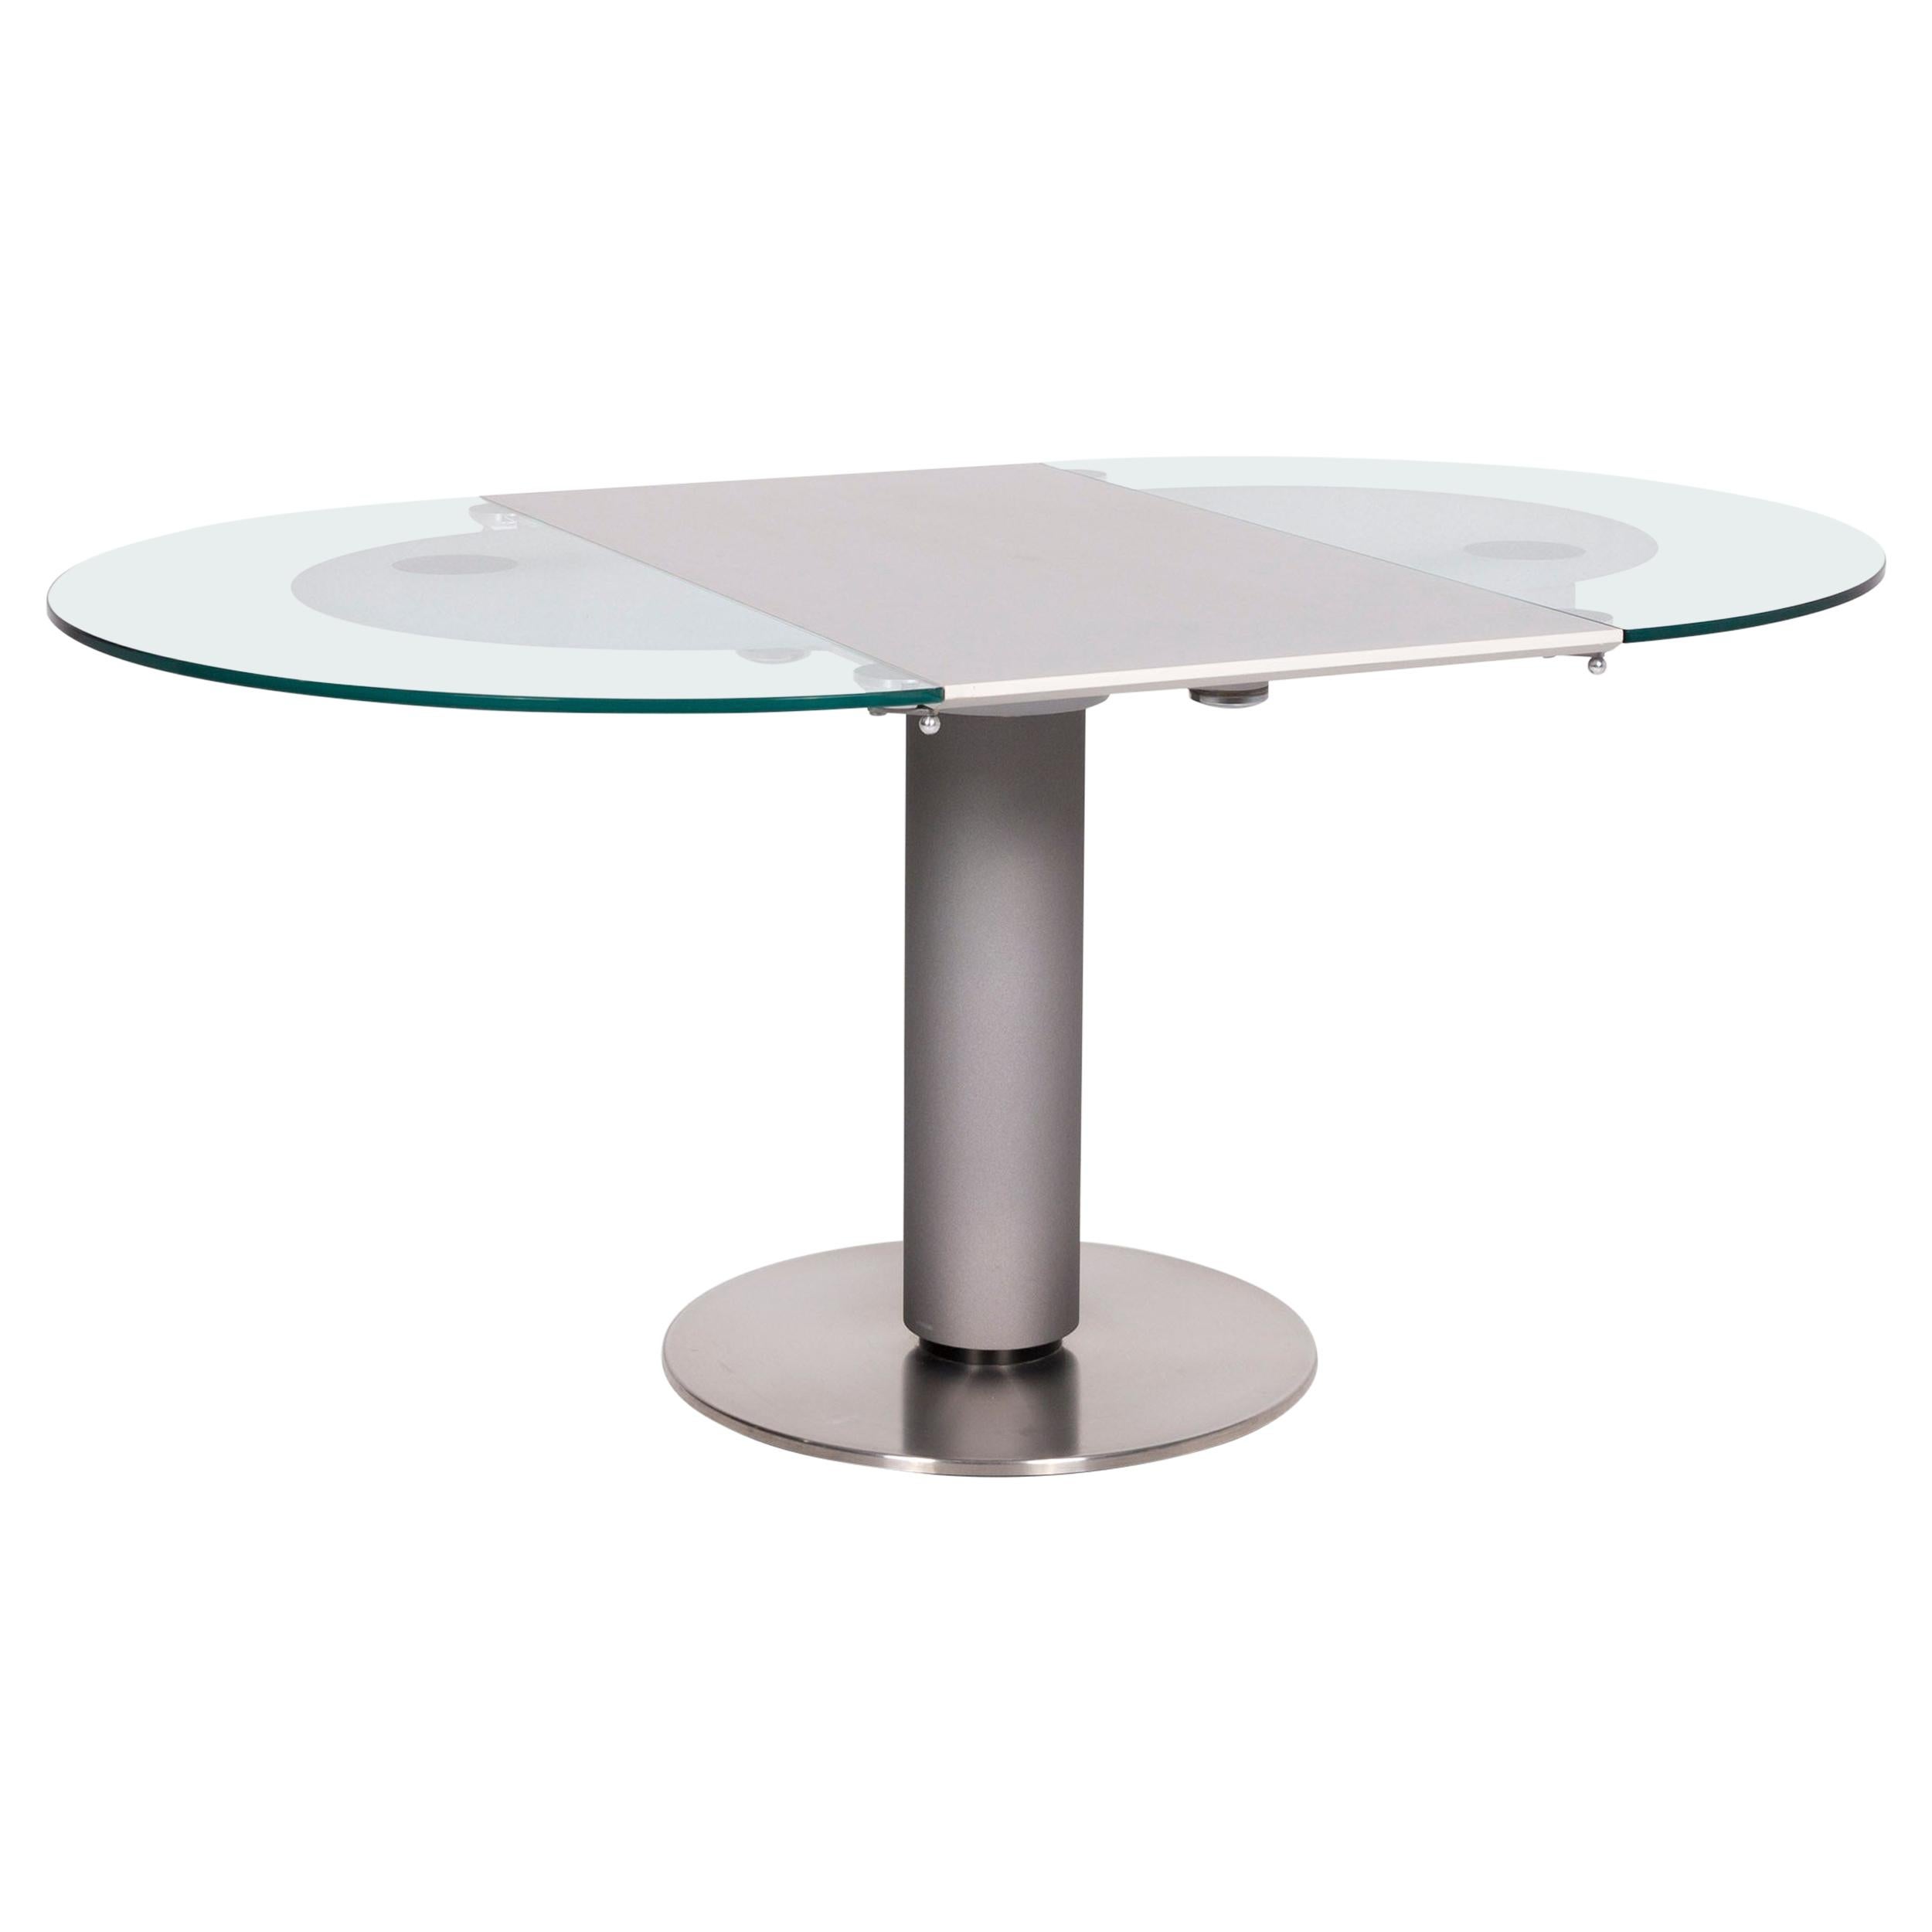 Ronald Schmitt K 765 / E Glass Table Silver Dining Table Size Adjustable For Sale